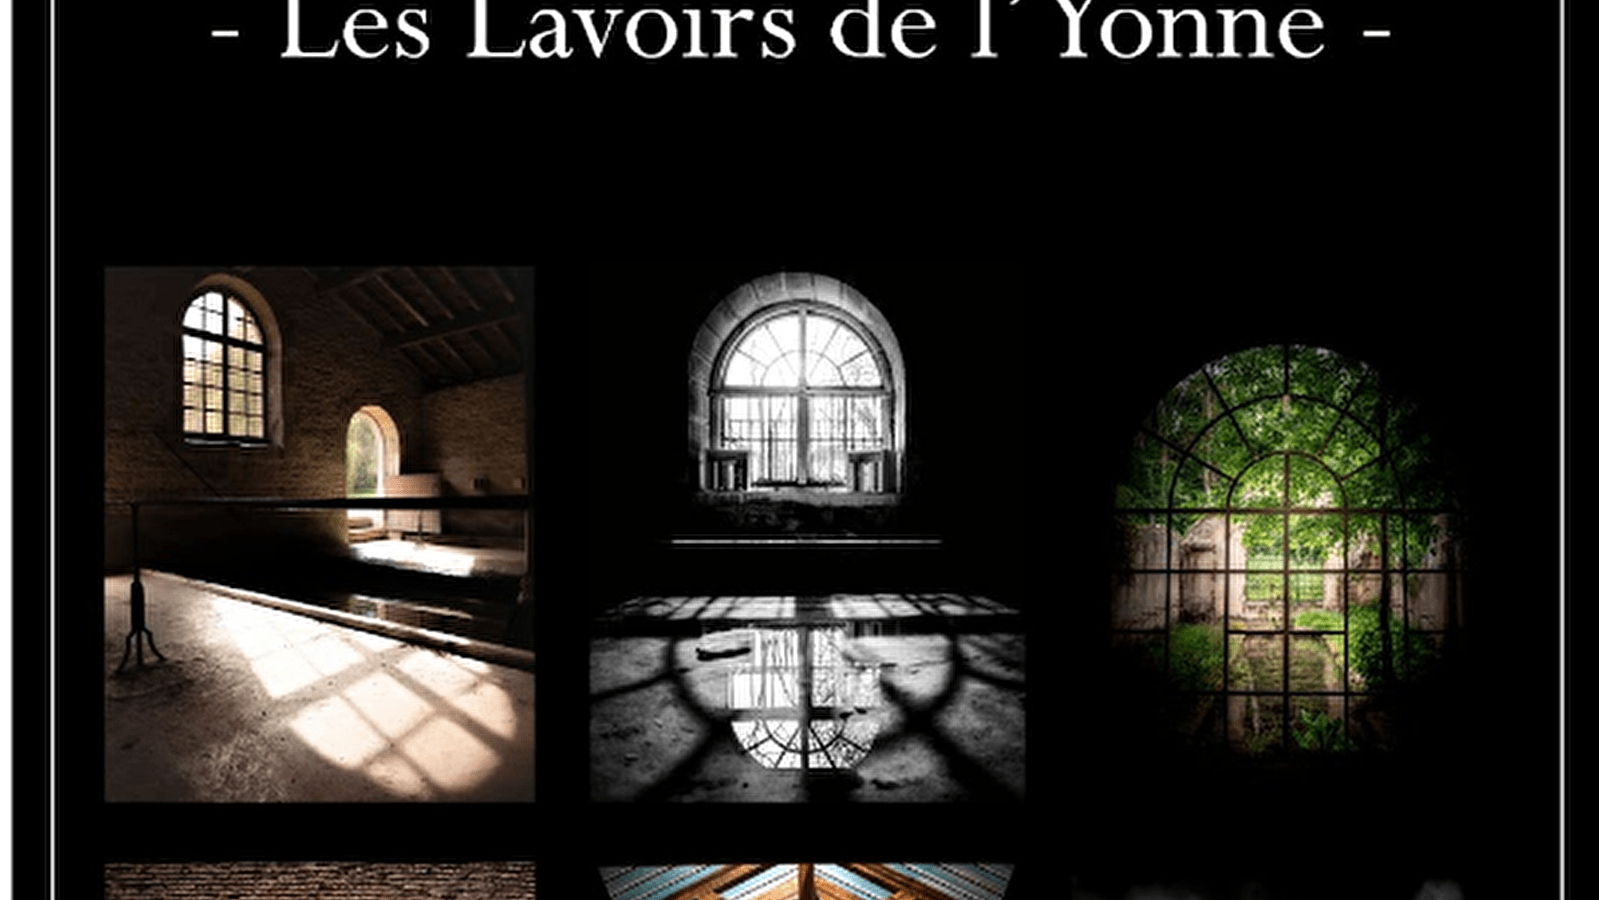 Exhibition 'The washhouses of the Yonne